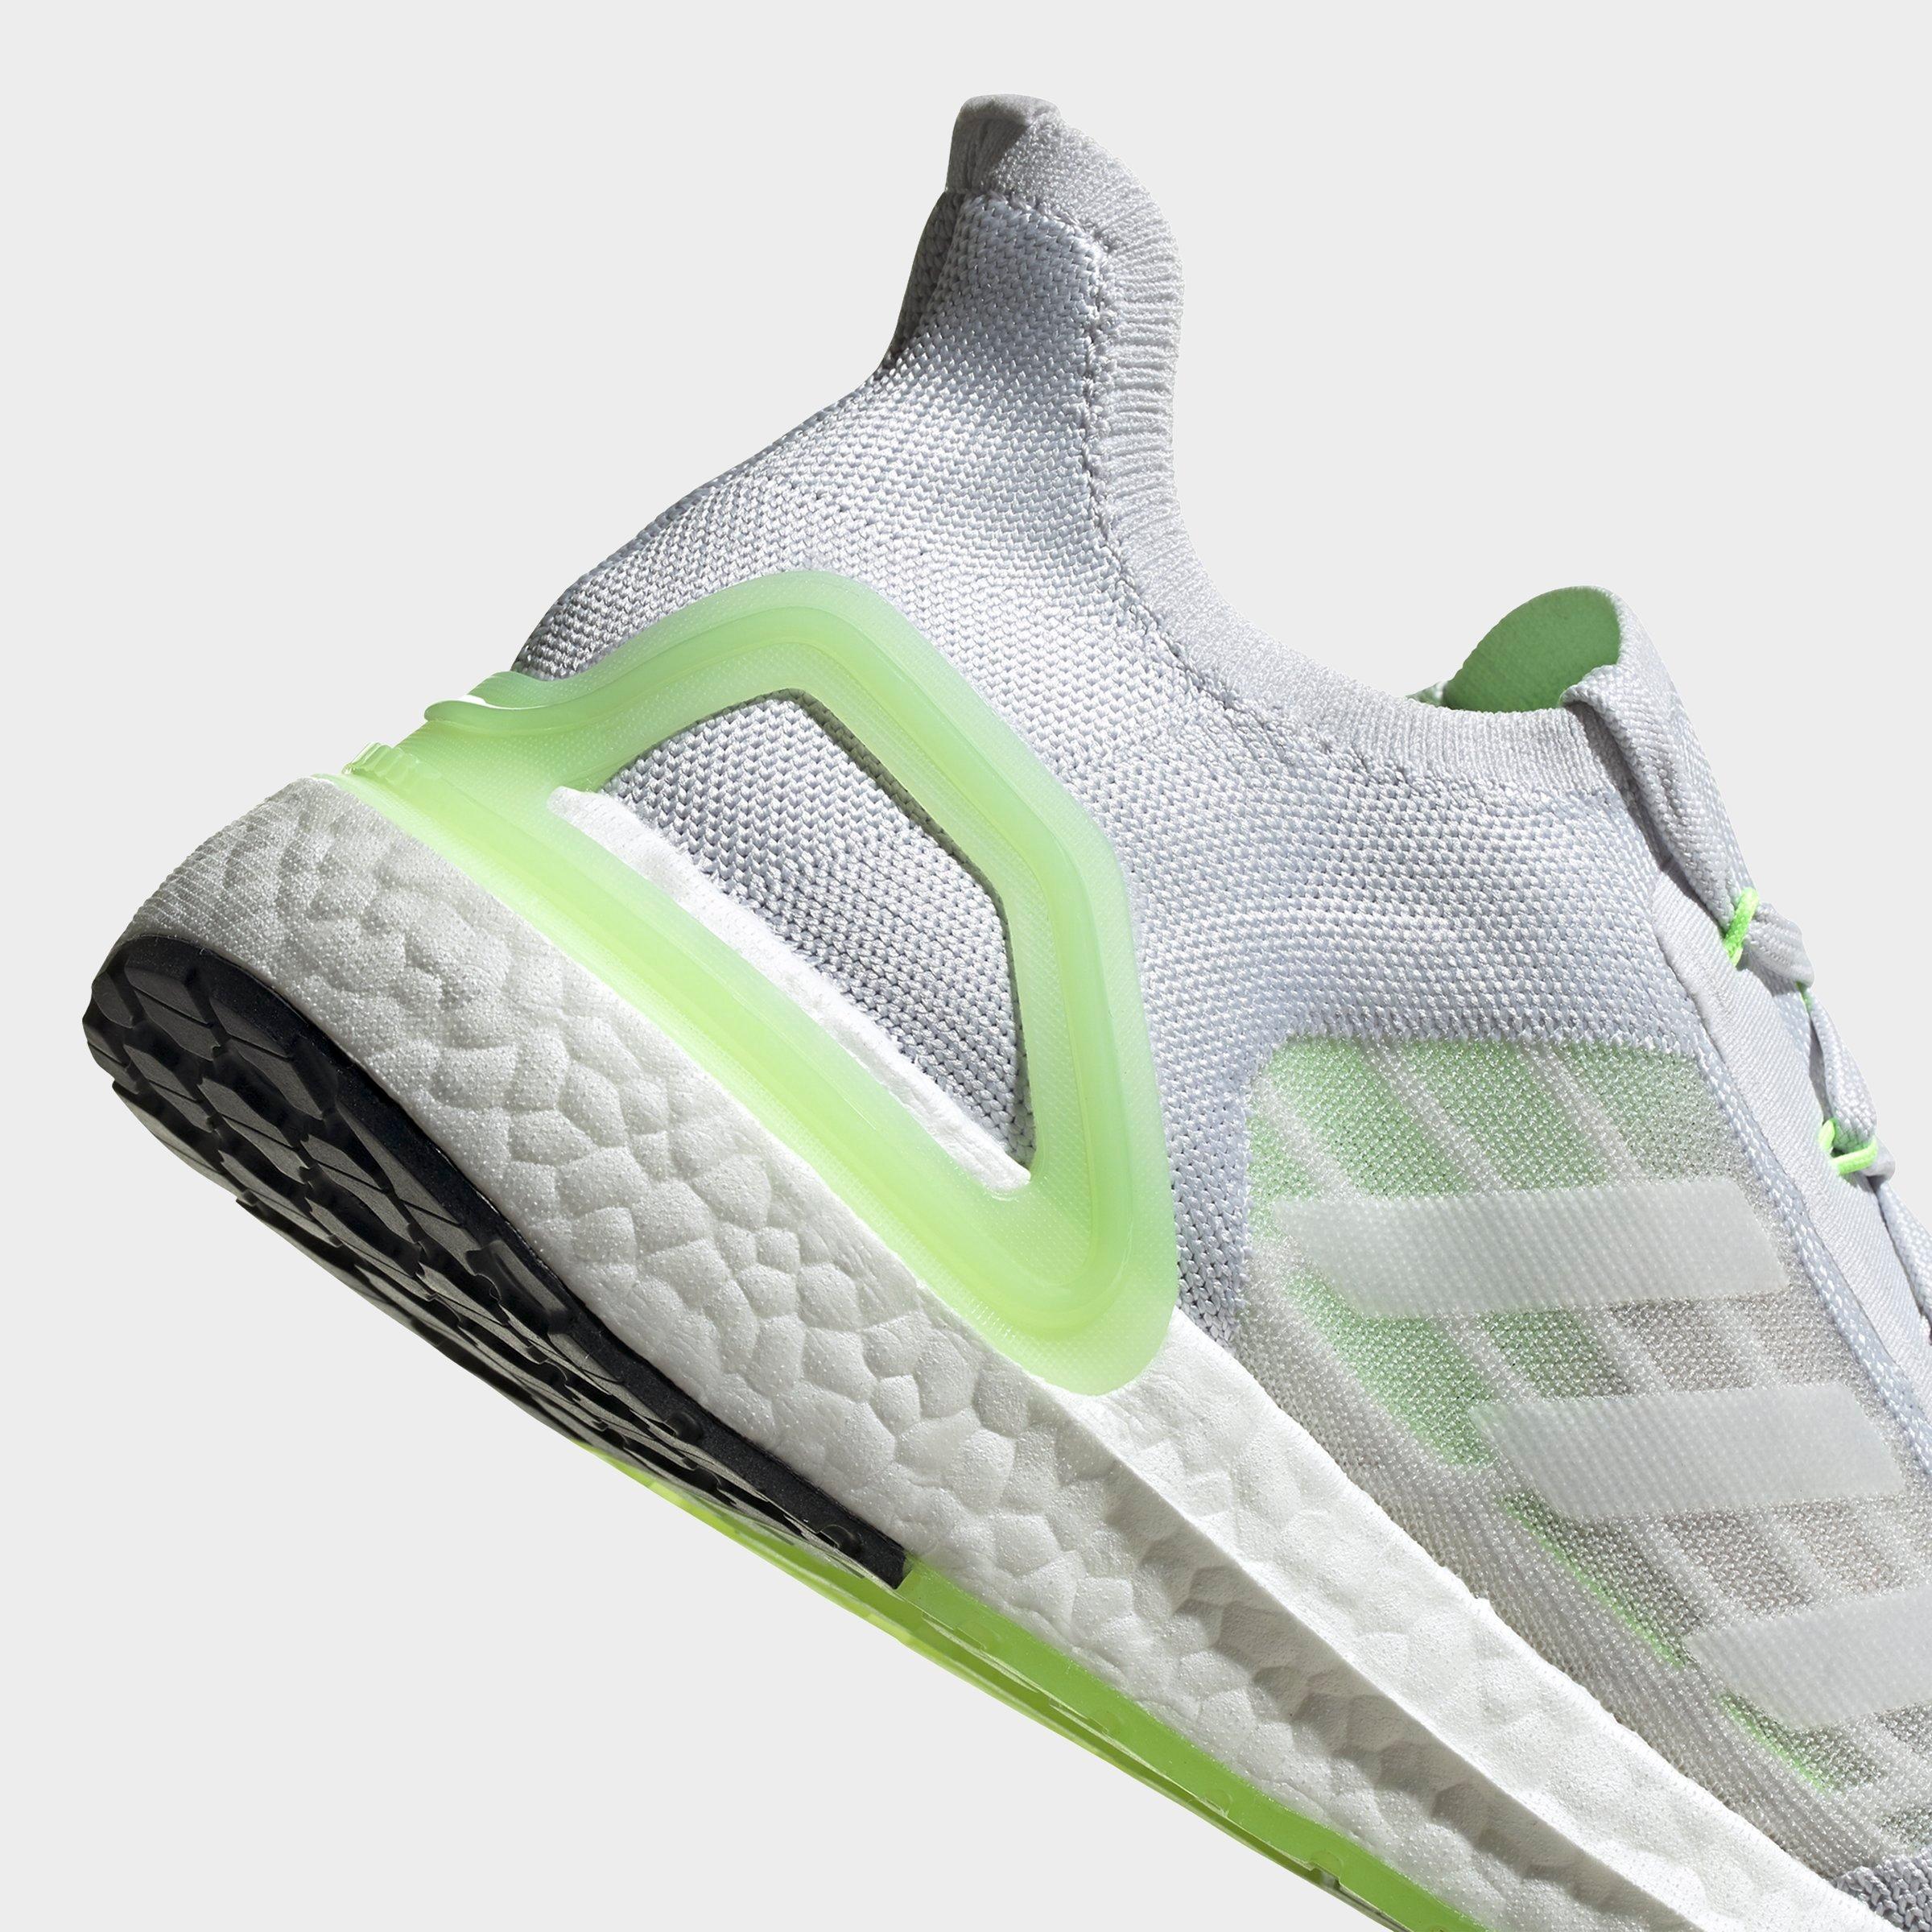 men's ultraboost running sneakers from finish line